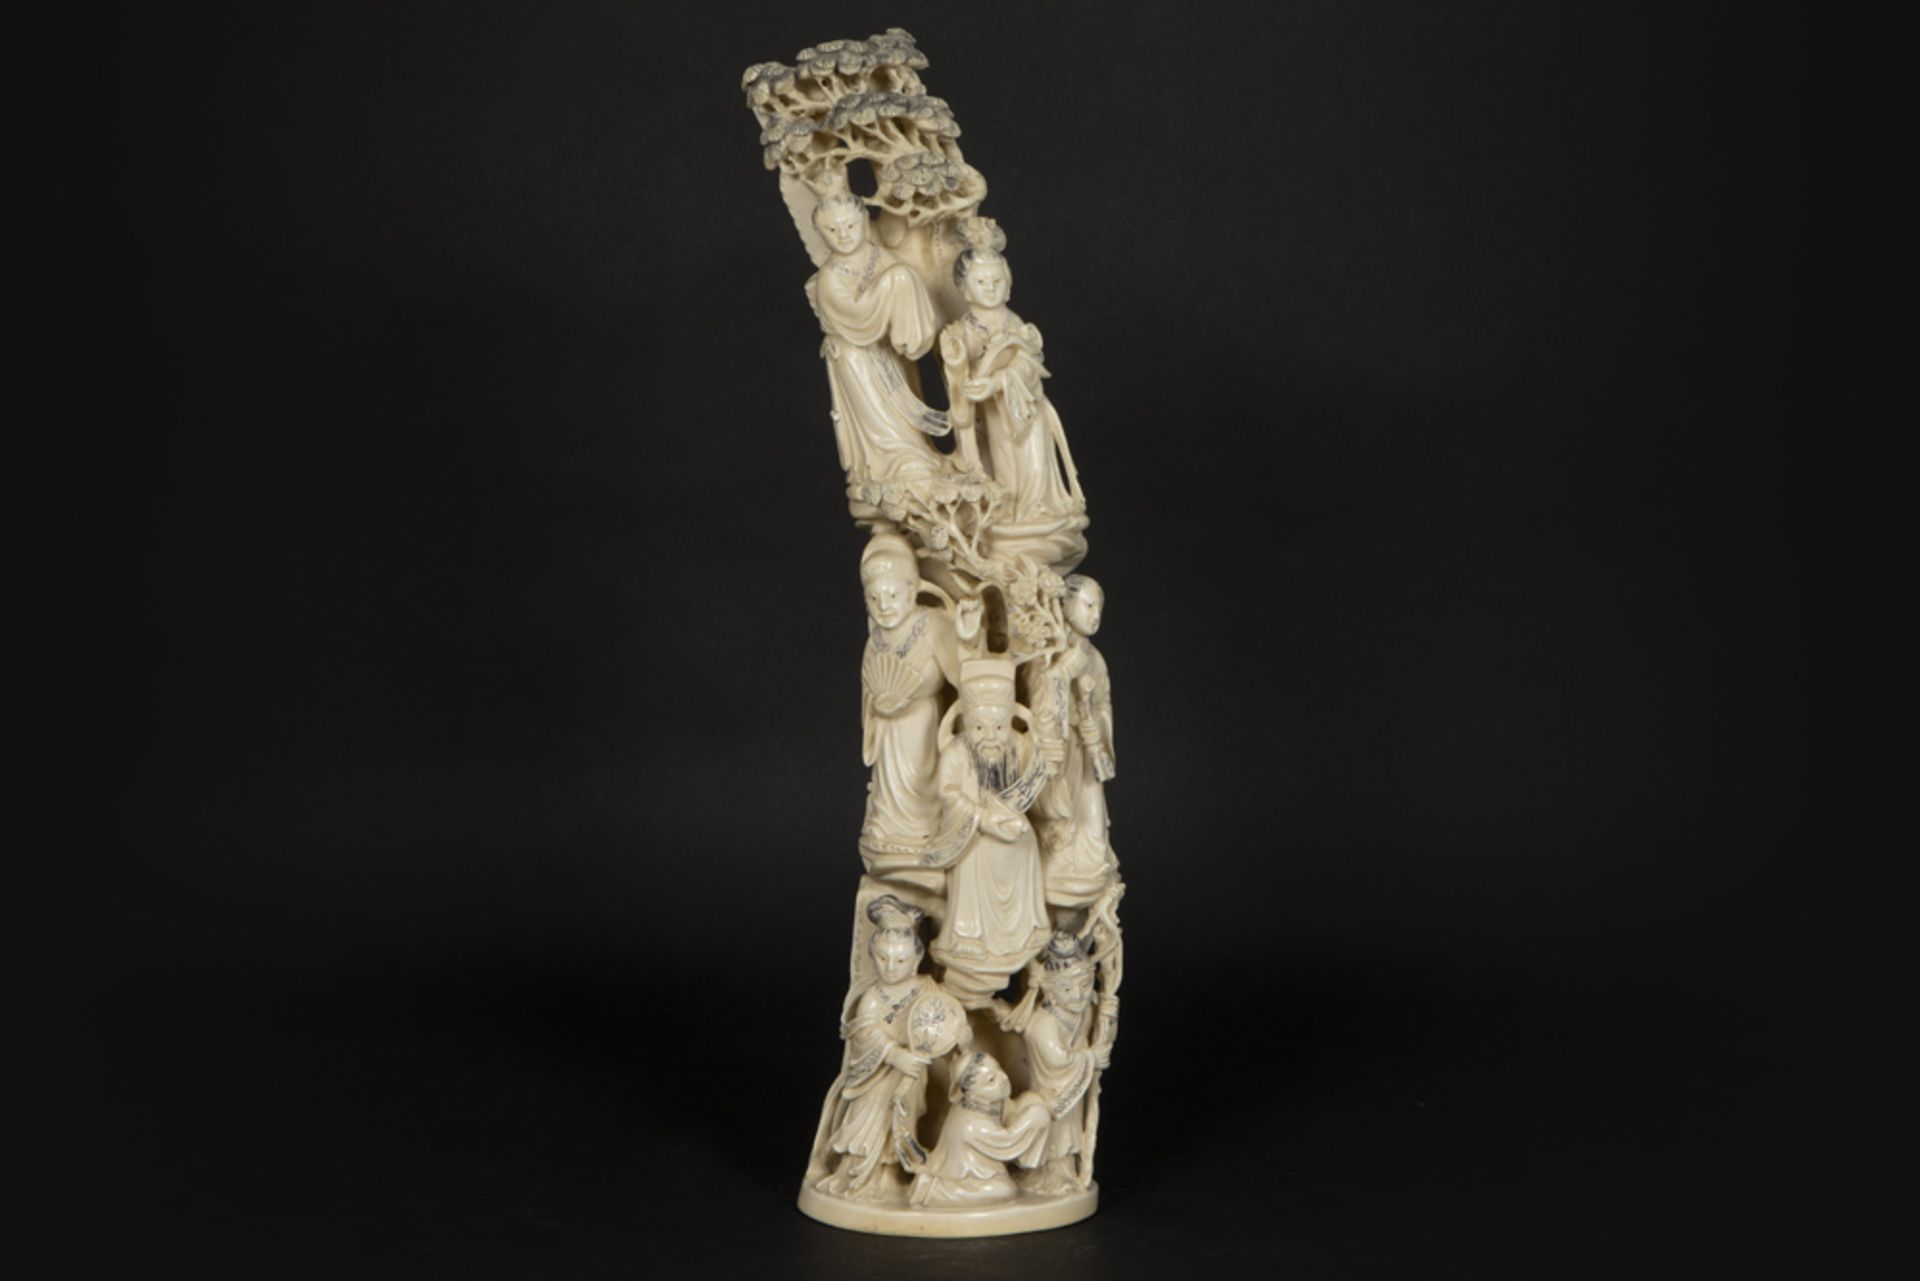 quite big 'antique' Chinese sculpture in ivory depicting a courtly scene with eight figures - ca